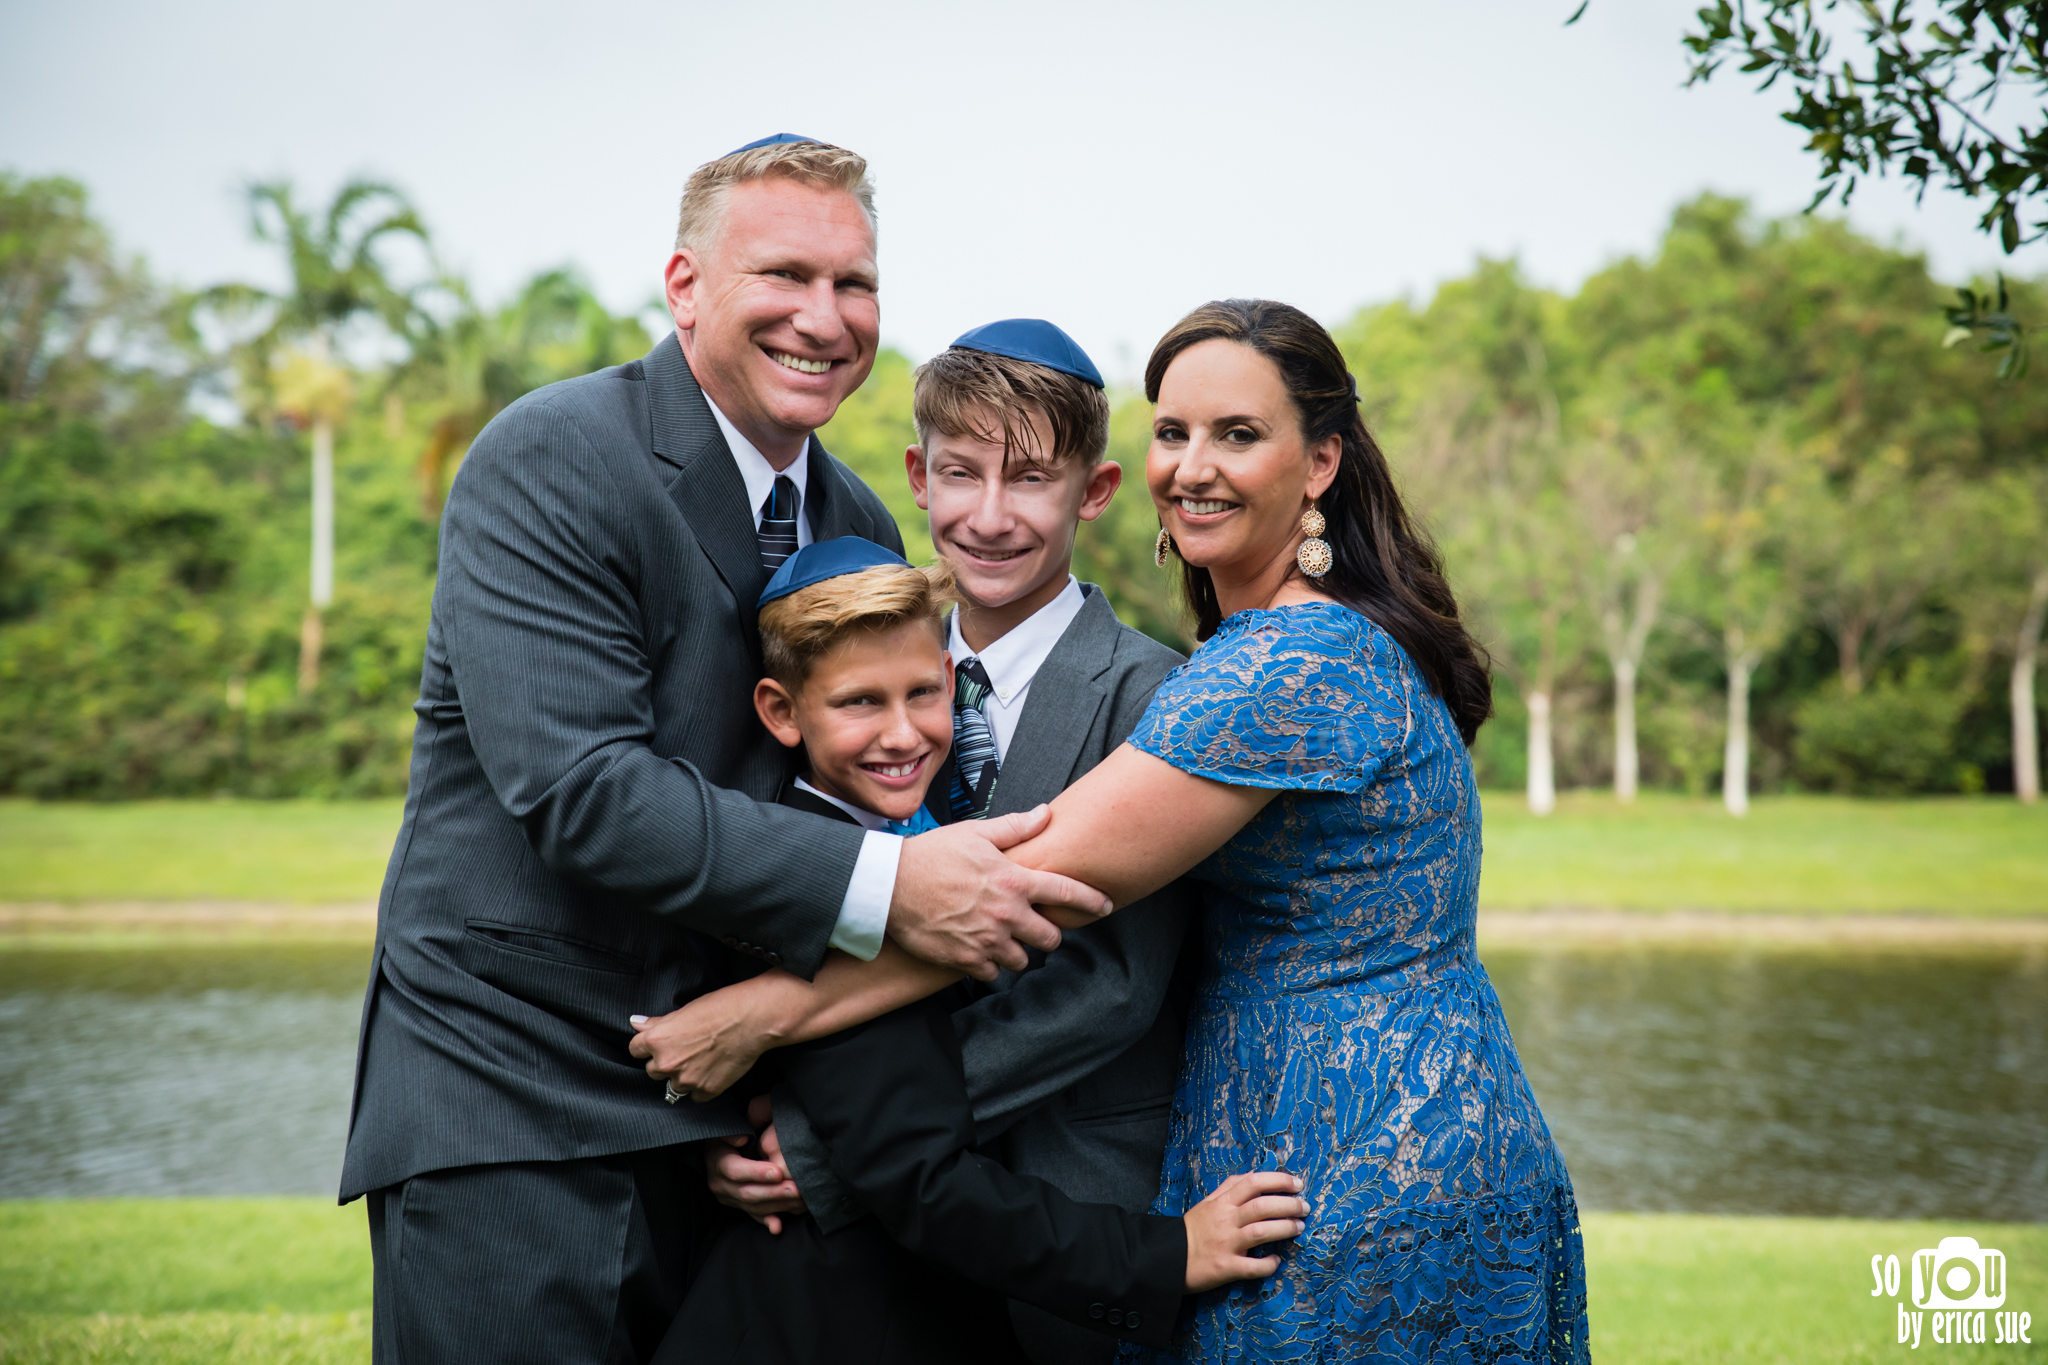 bar-mitzvah-photography-ft-lauderdale-so-you-by-erica-sue-.jpg